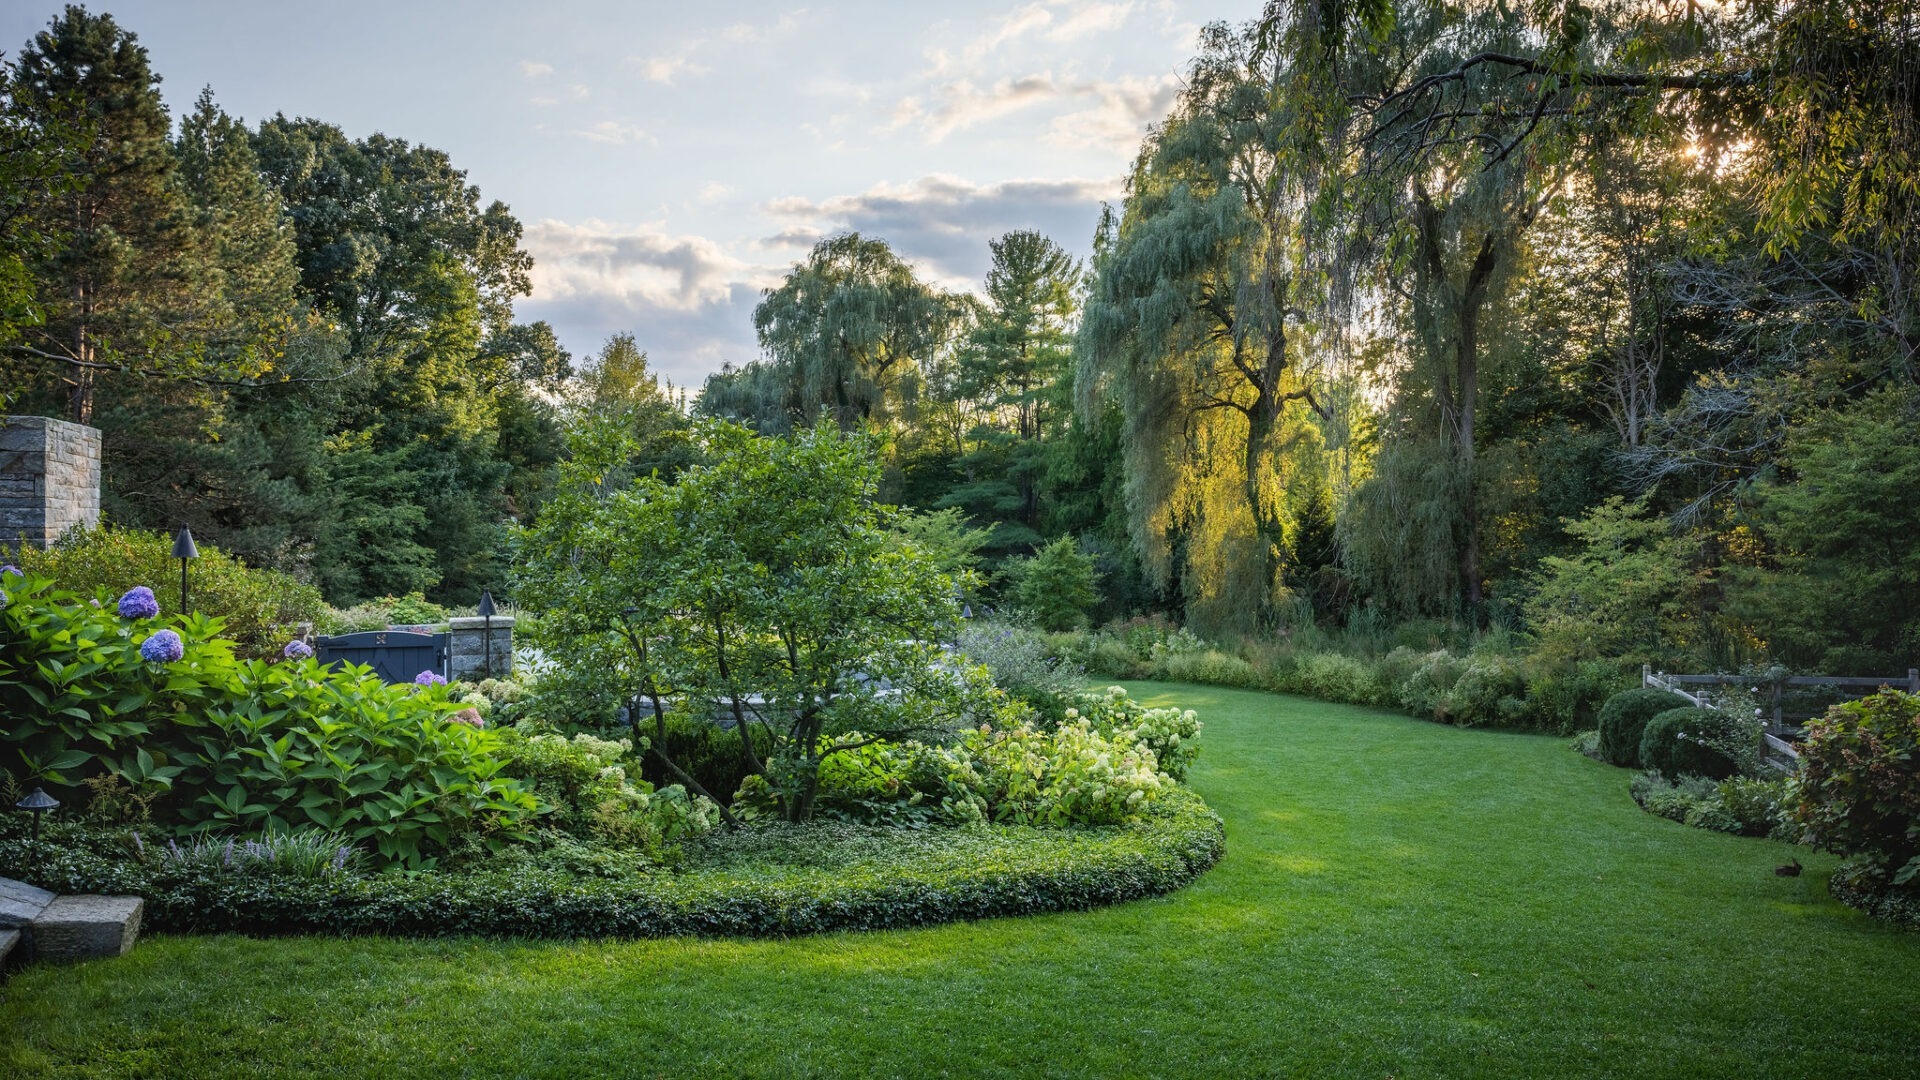 A lush garden with neatly trimmed grass, vibrant shrubs, and towering trees, bathed in the soft light of early evening. A serene landscape setting.